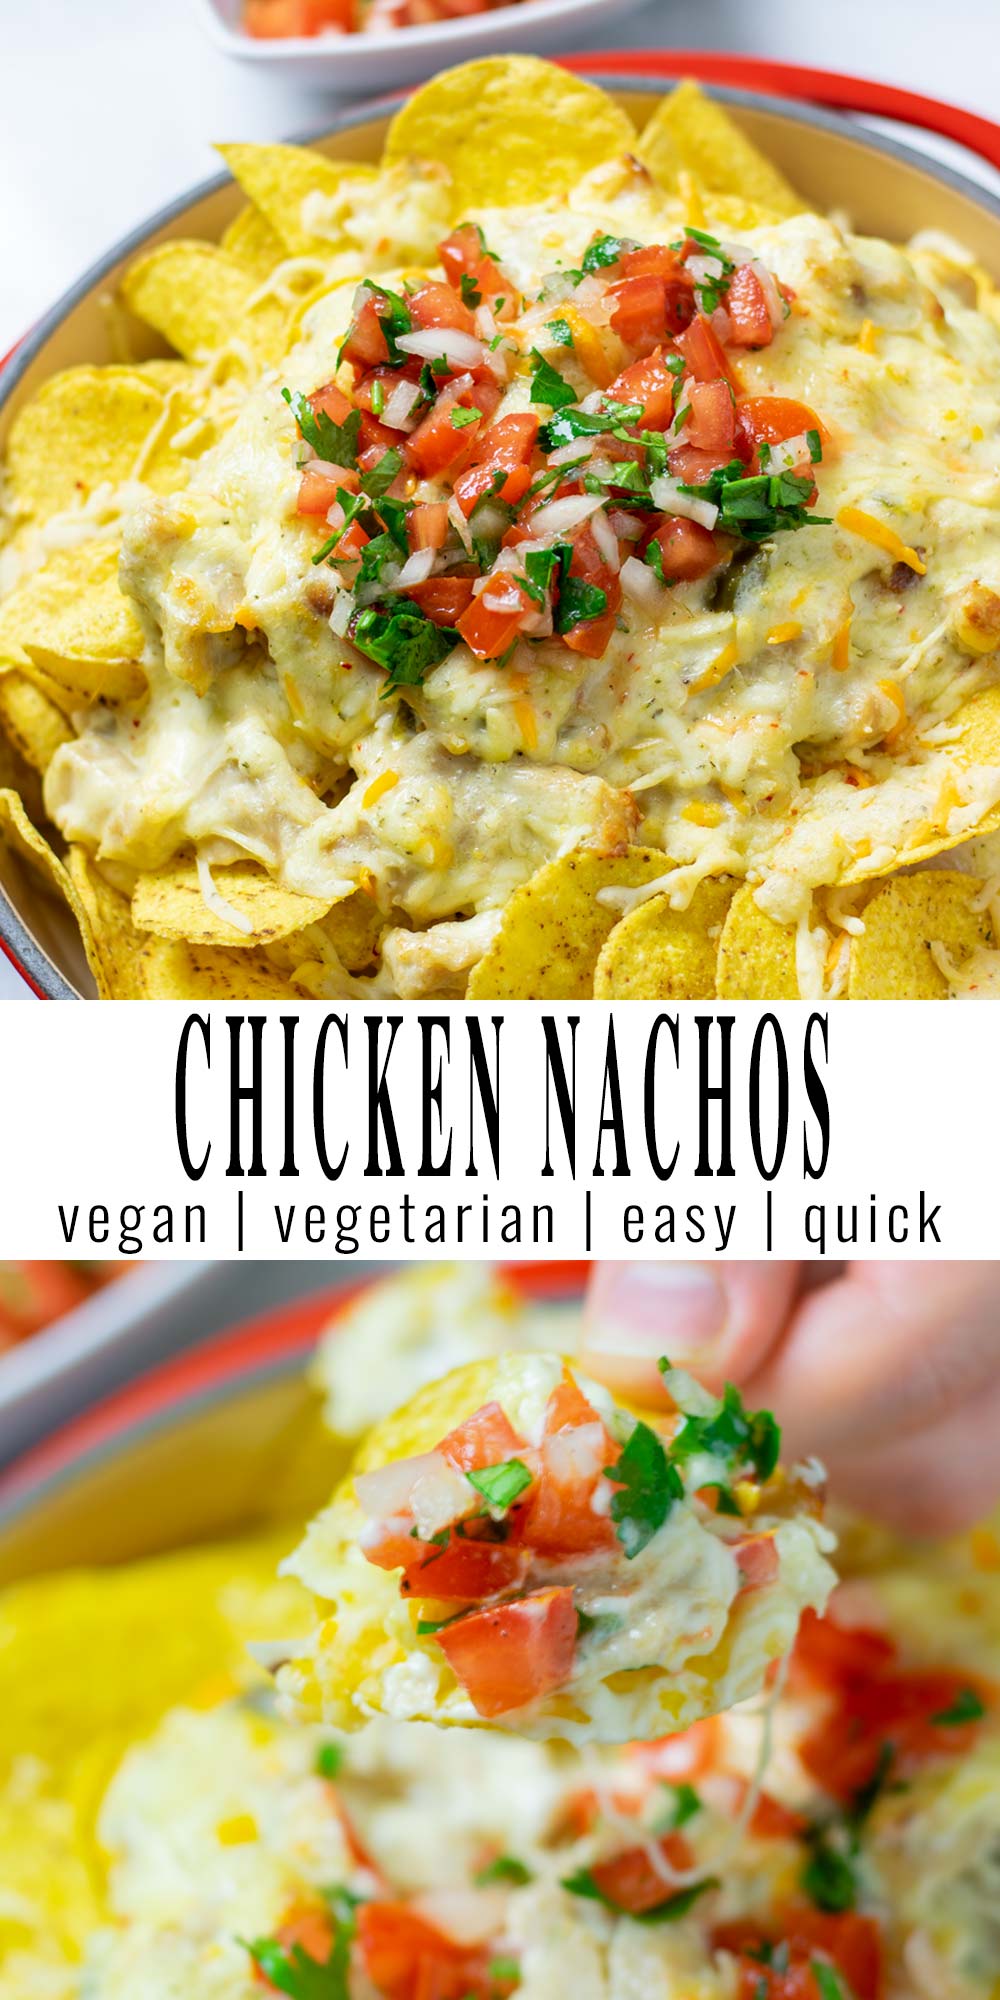 Collage of two pictures of the Chicken Nachos with recipe title text.